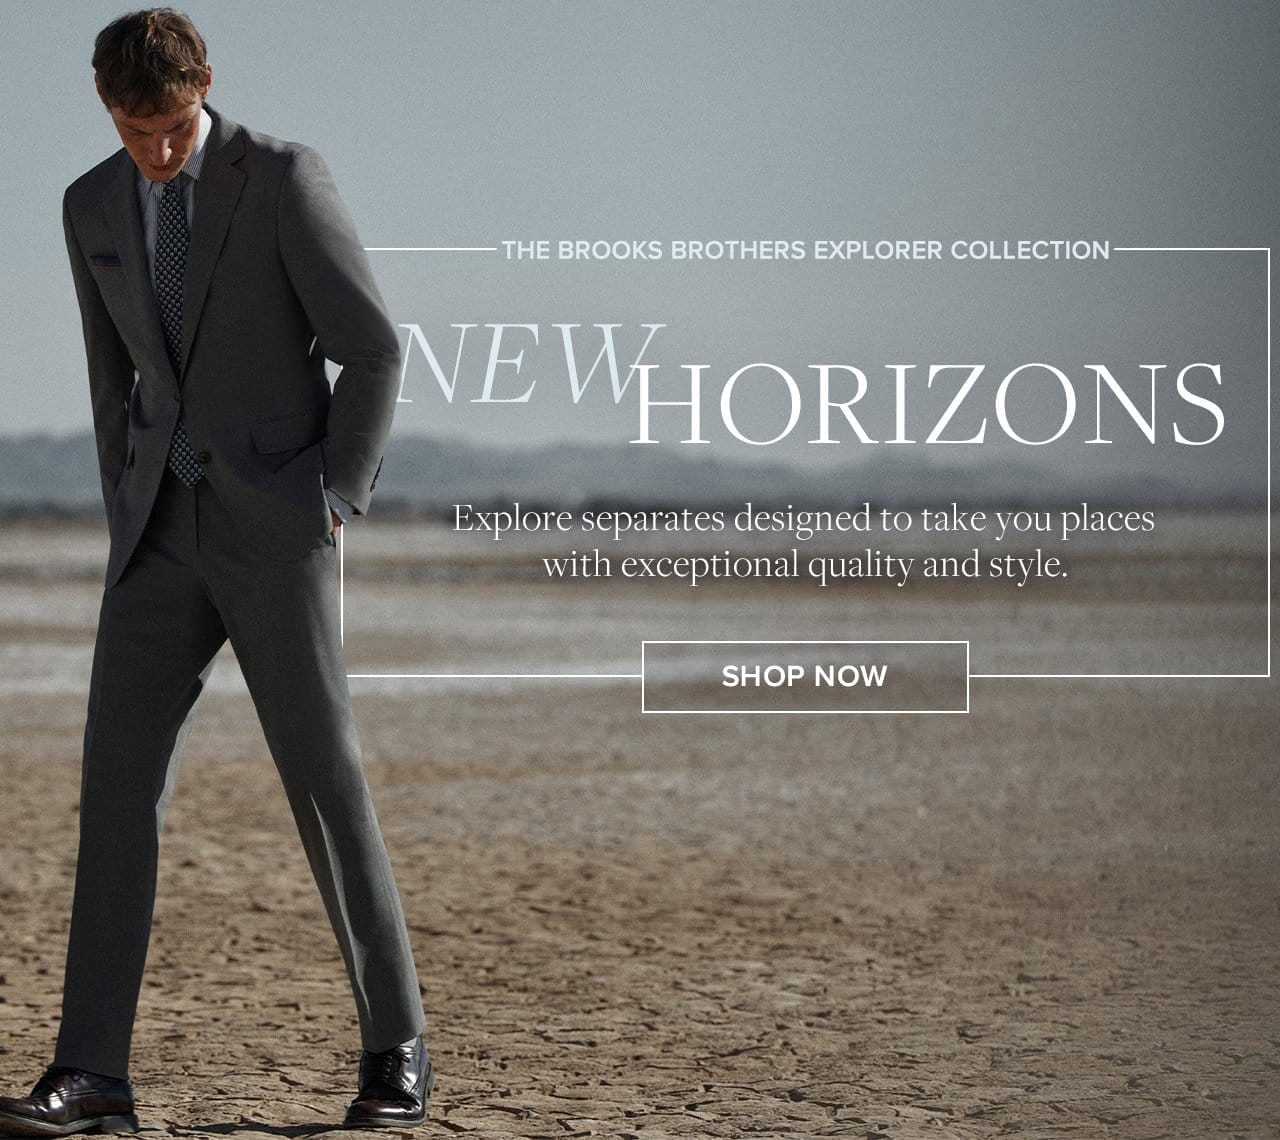 The Brooks Brothers Explorer Collection New Horizons Explore separates designed to take you places with exceptional quality style. Shop Now